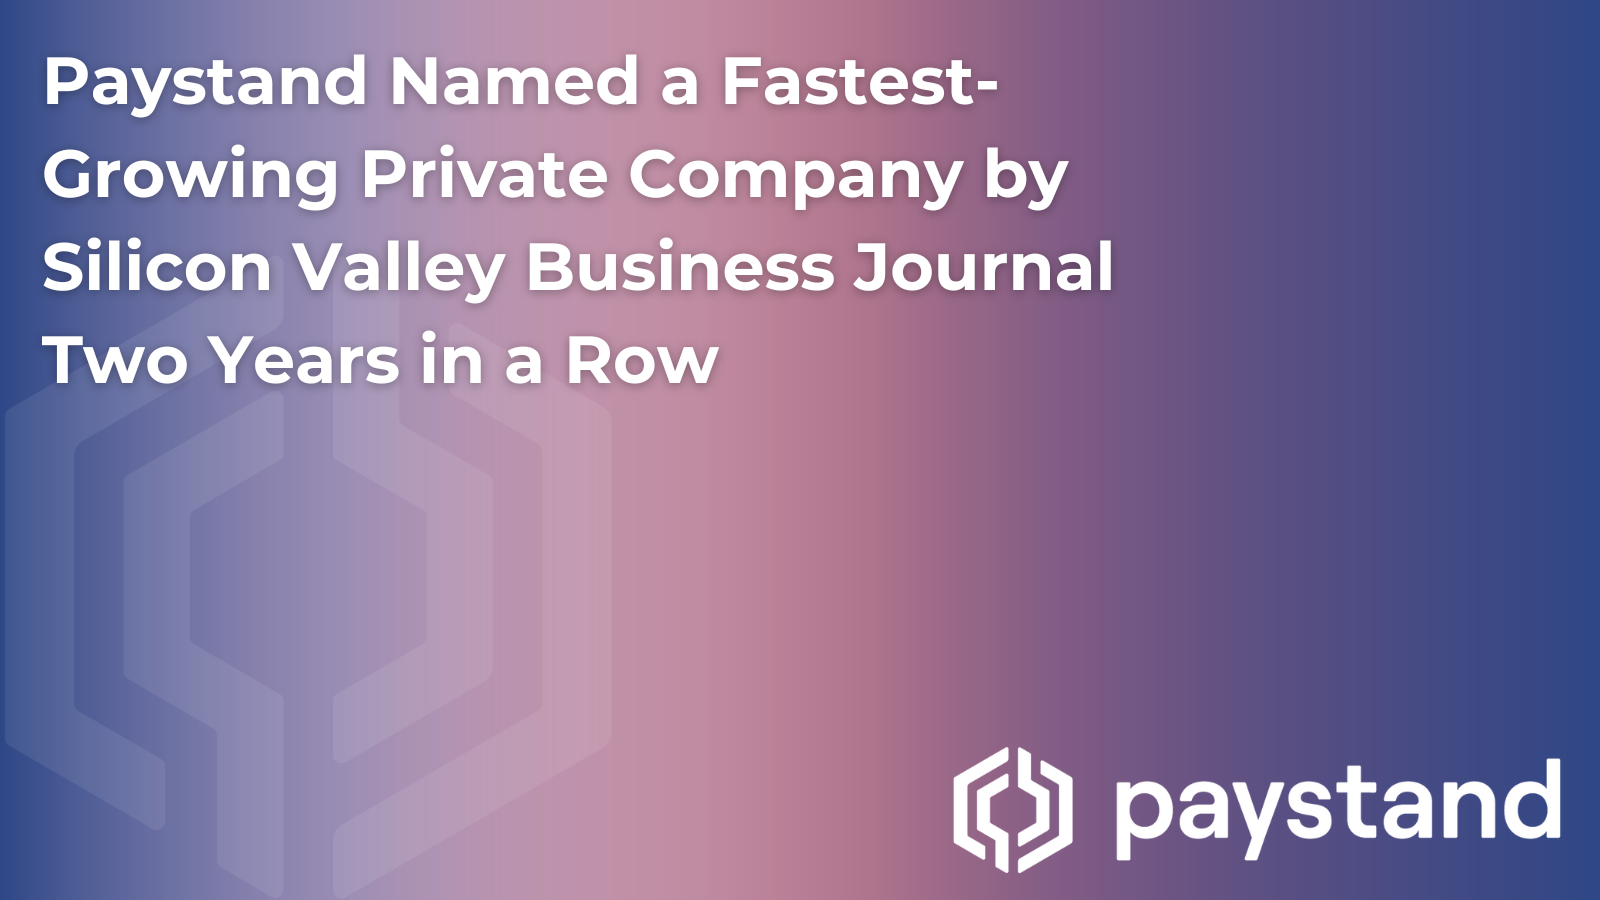 Paystand Named a Fastest-Growing Private Company by Silicon Valley Business Journal Two Years in a Row